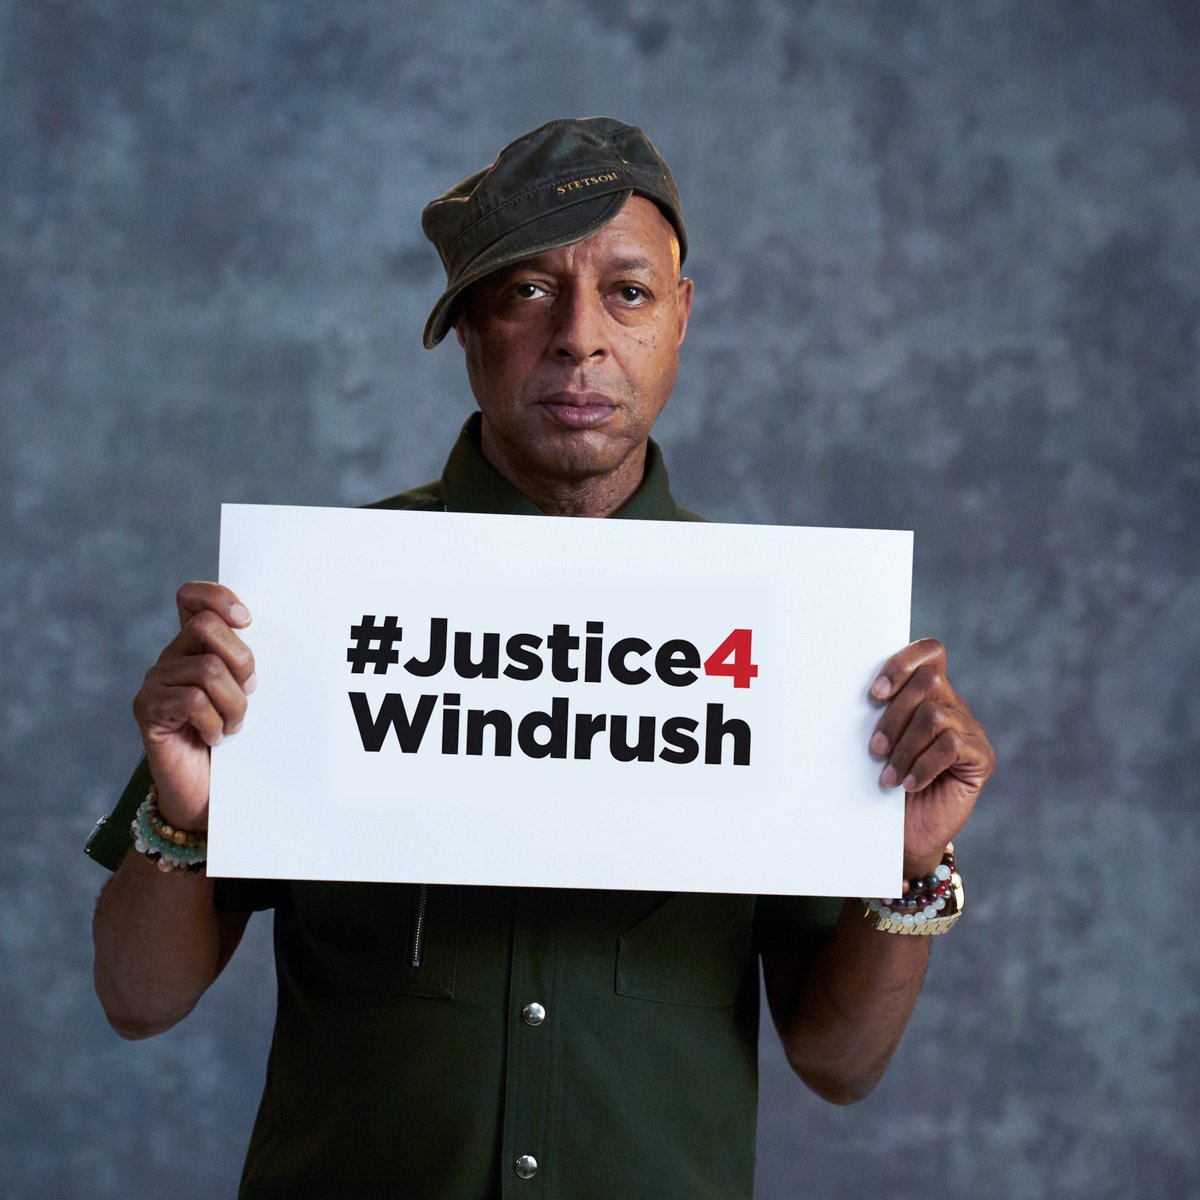 Join me in supporting the #jusitce4Windrush campaign. To show your support sign the open letter at justice4windrush.org, watch the newly released campaign film and follow @j4windrush to stay up to date with the campaign #justice4windrush